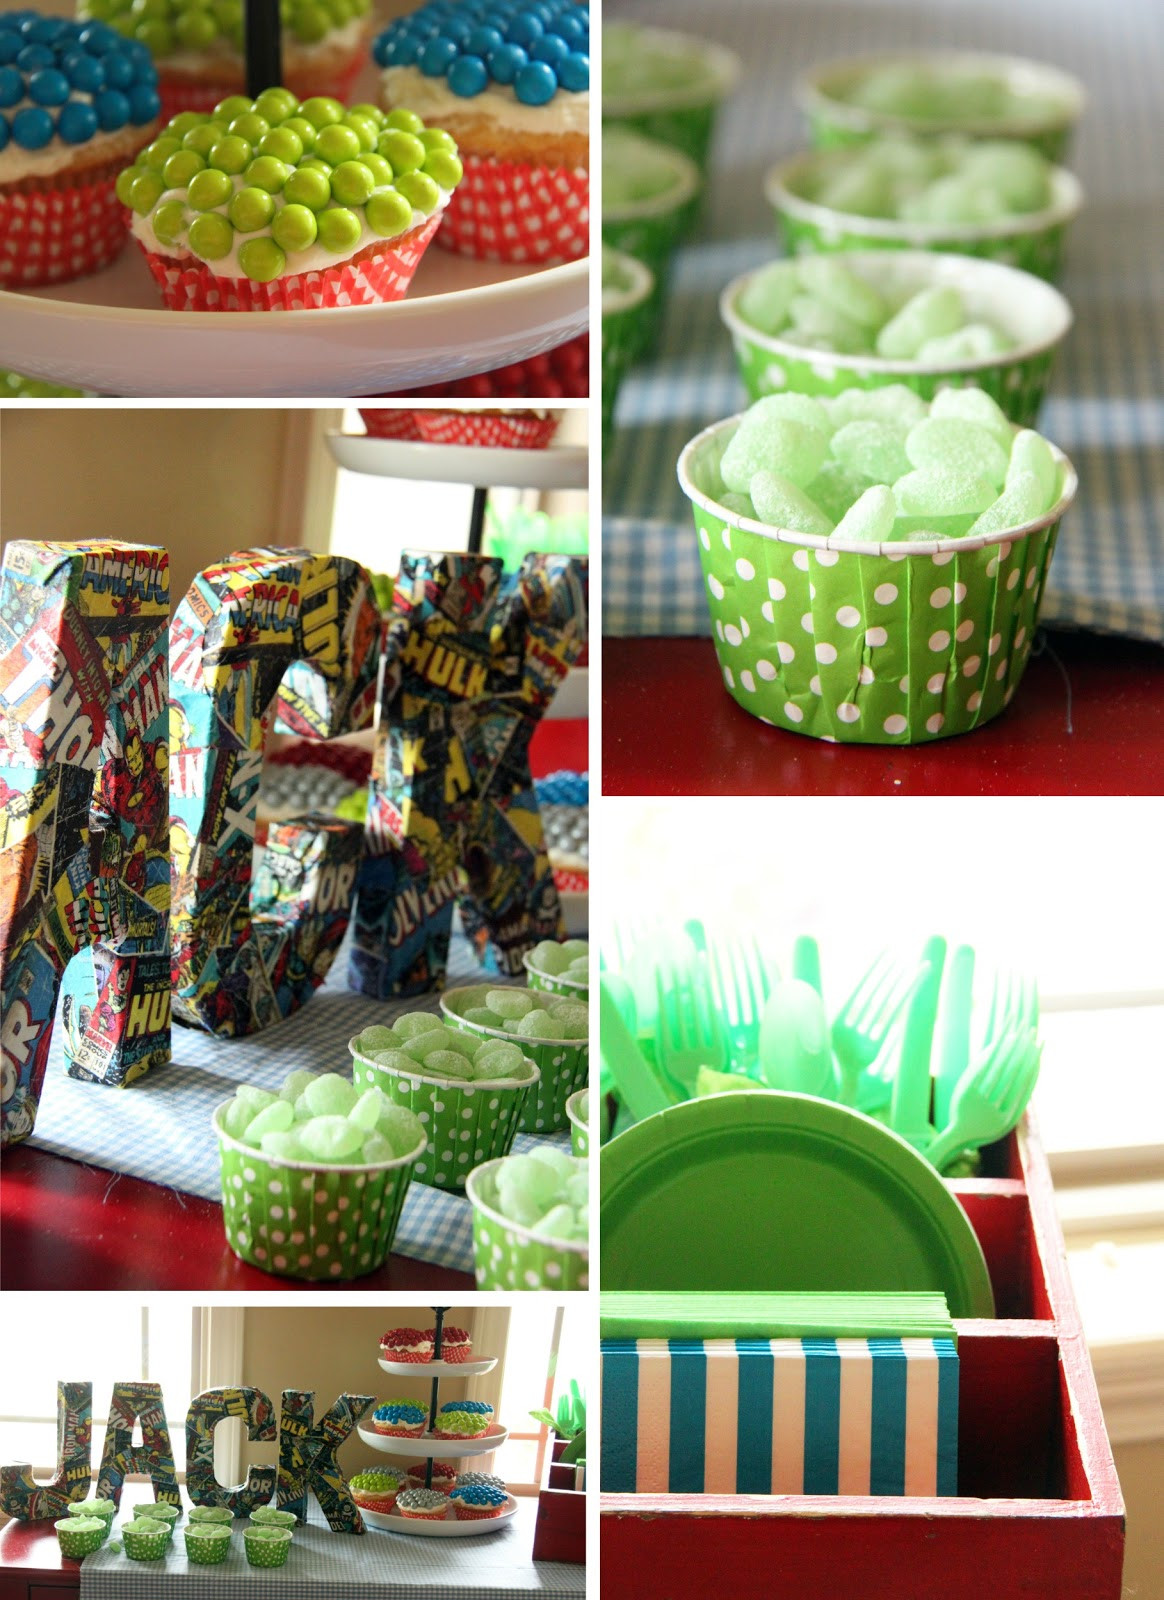 Avengers Birthday Party Ideas
 Larissa Another Day Avenger Assemble Birthday Party